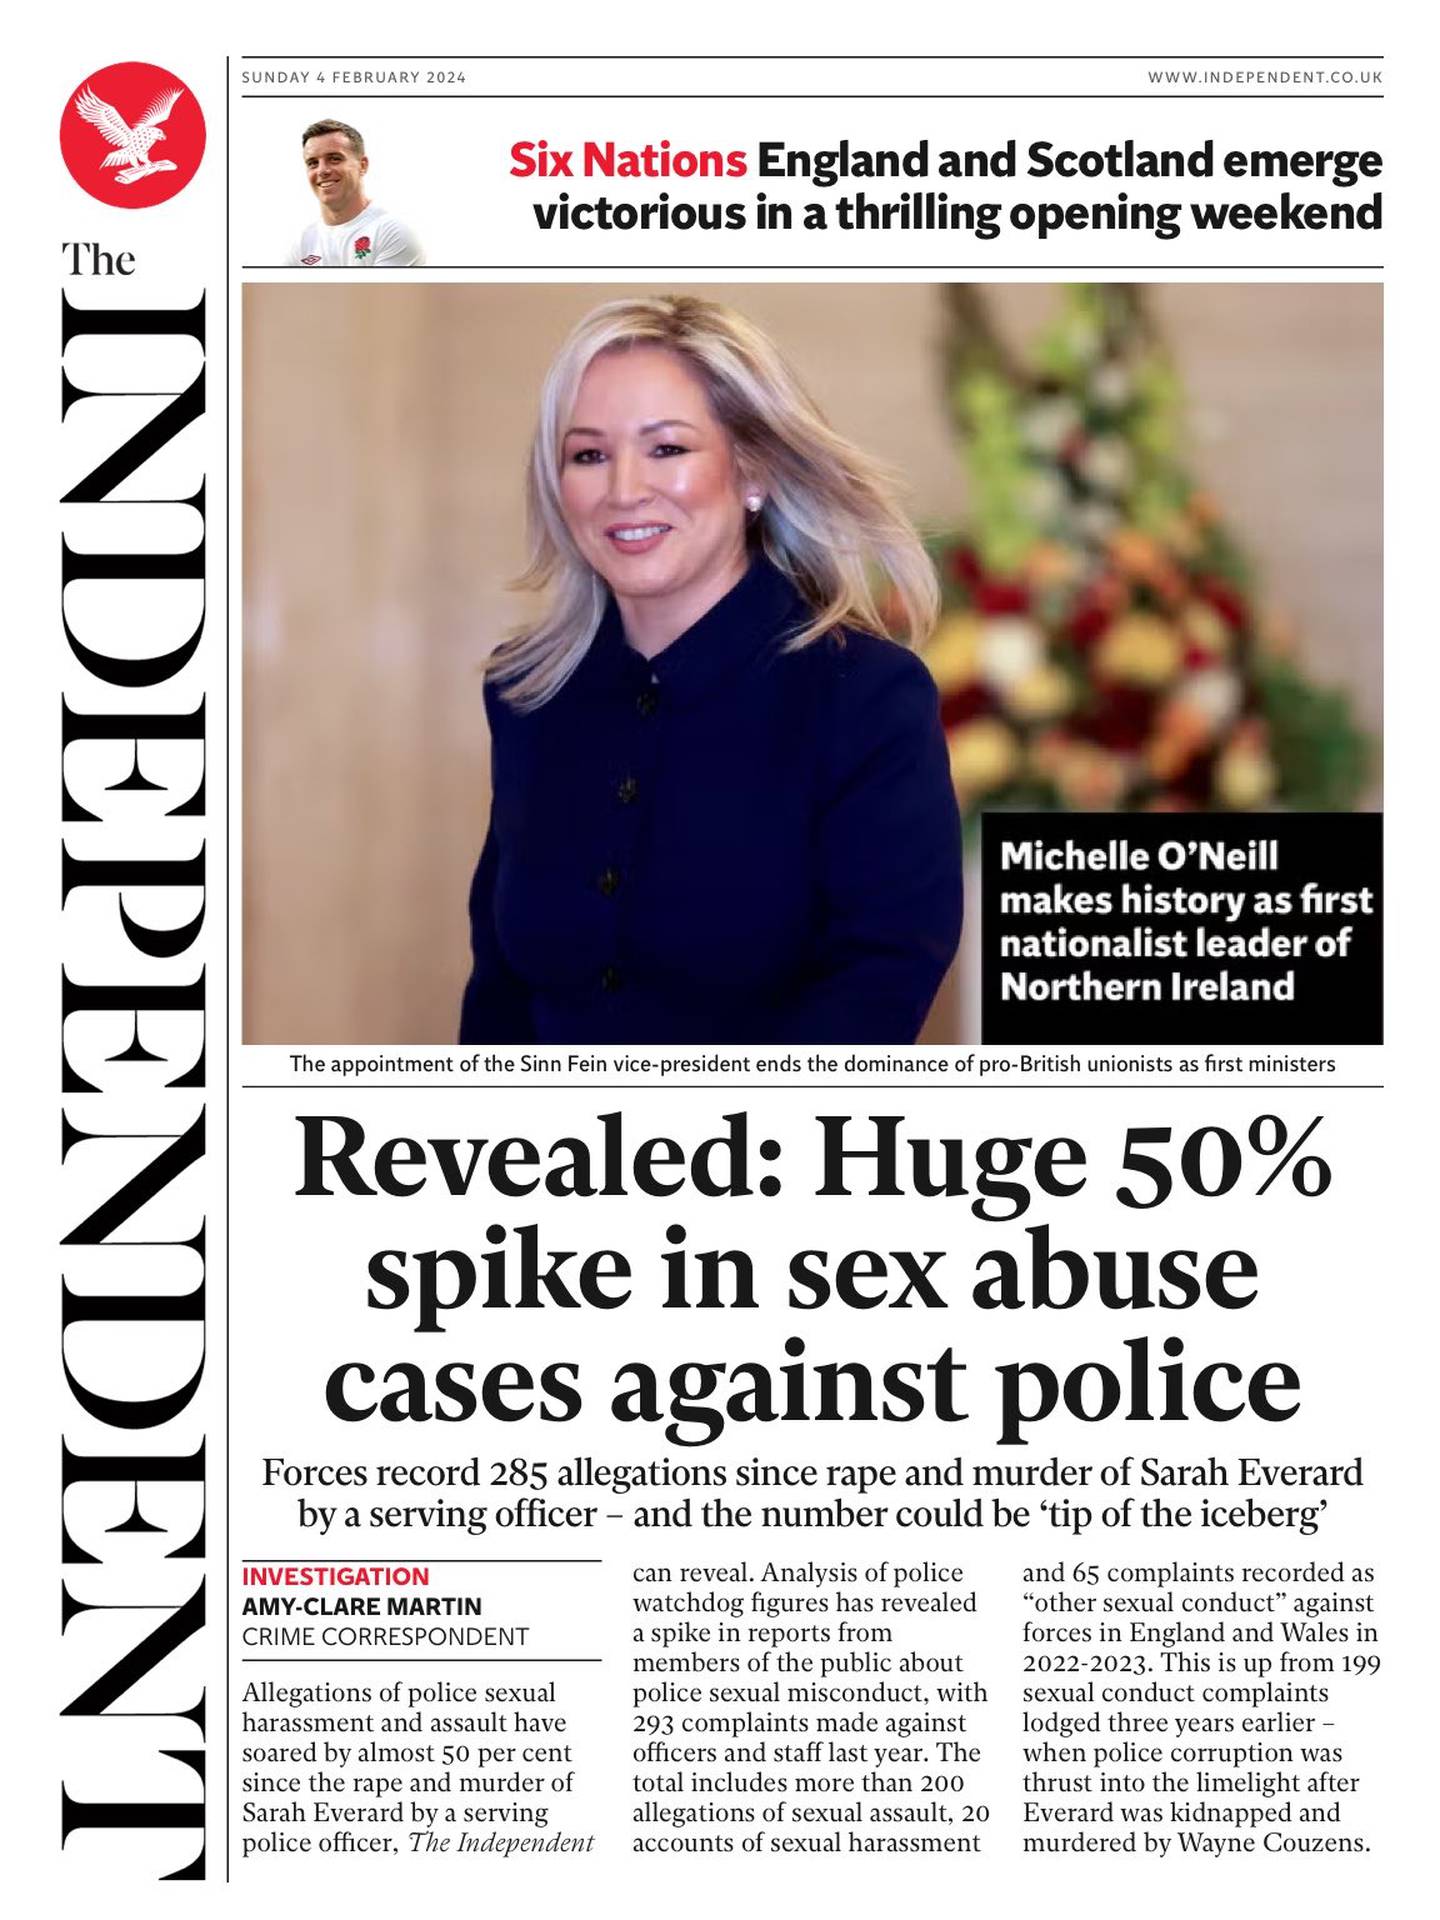 The Independent front page